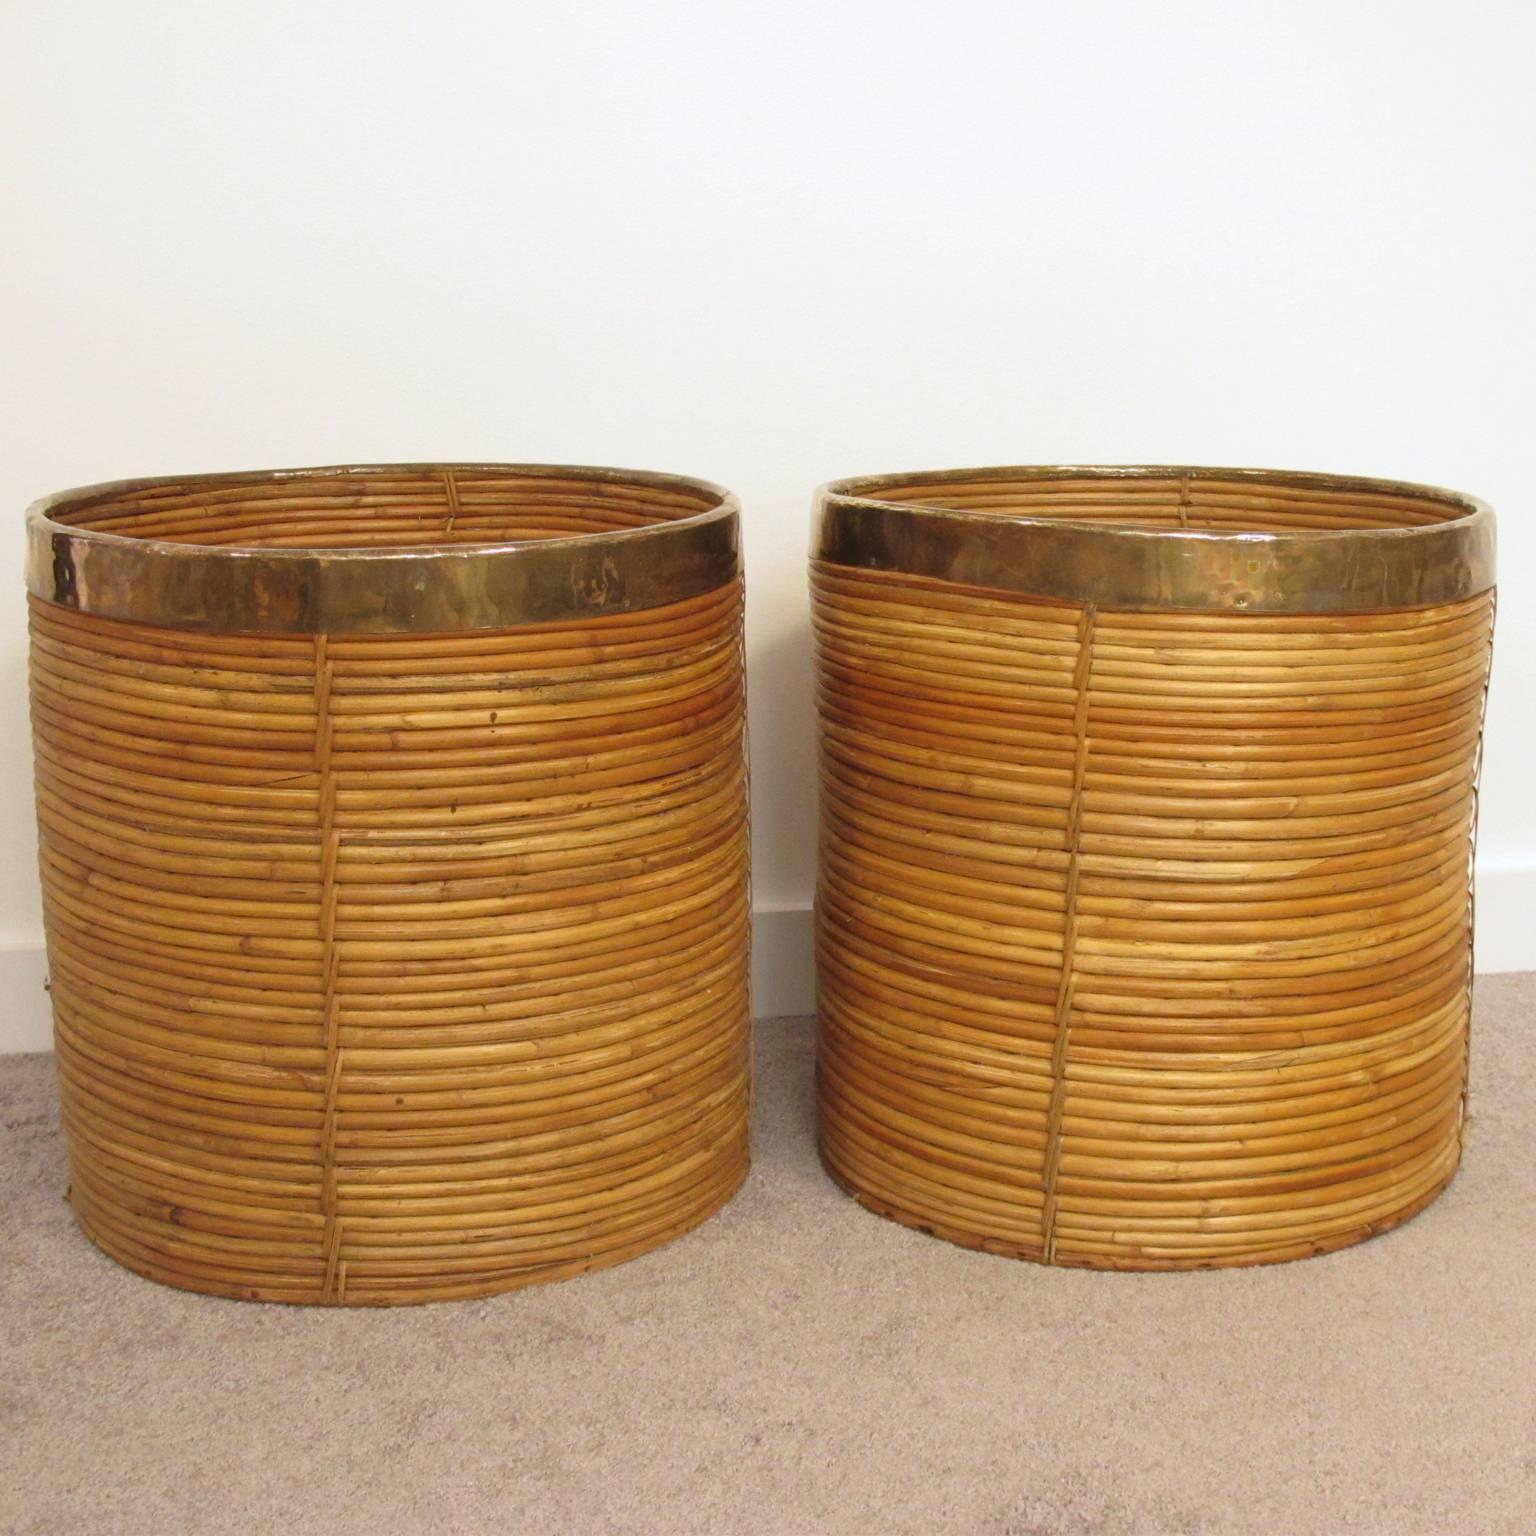 Nice pair of Mid-Century Modern brass and bamboo or rattan large planters. Round shape with gilded brass trim. Made in Italy, circa 1970s and reminiscent of Gabriella Crespi work. Very good vintage condition.

Measurements: 17.94 in. diameter